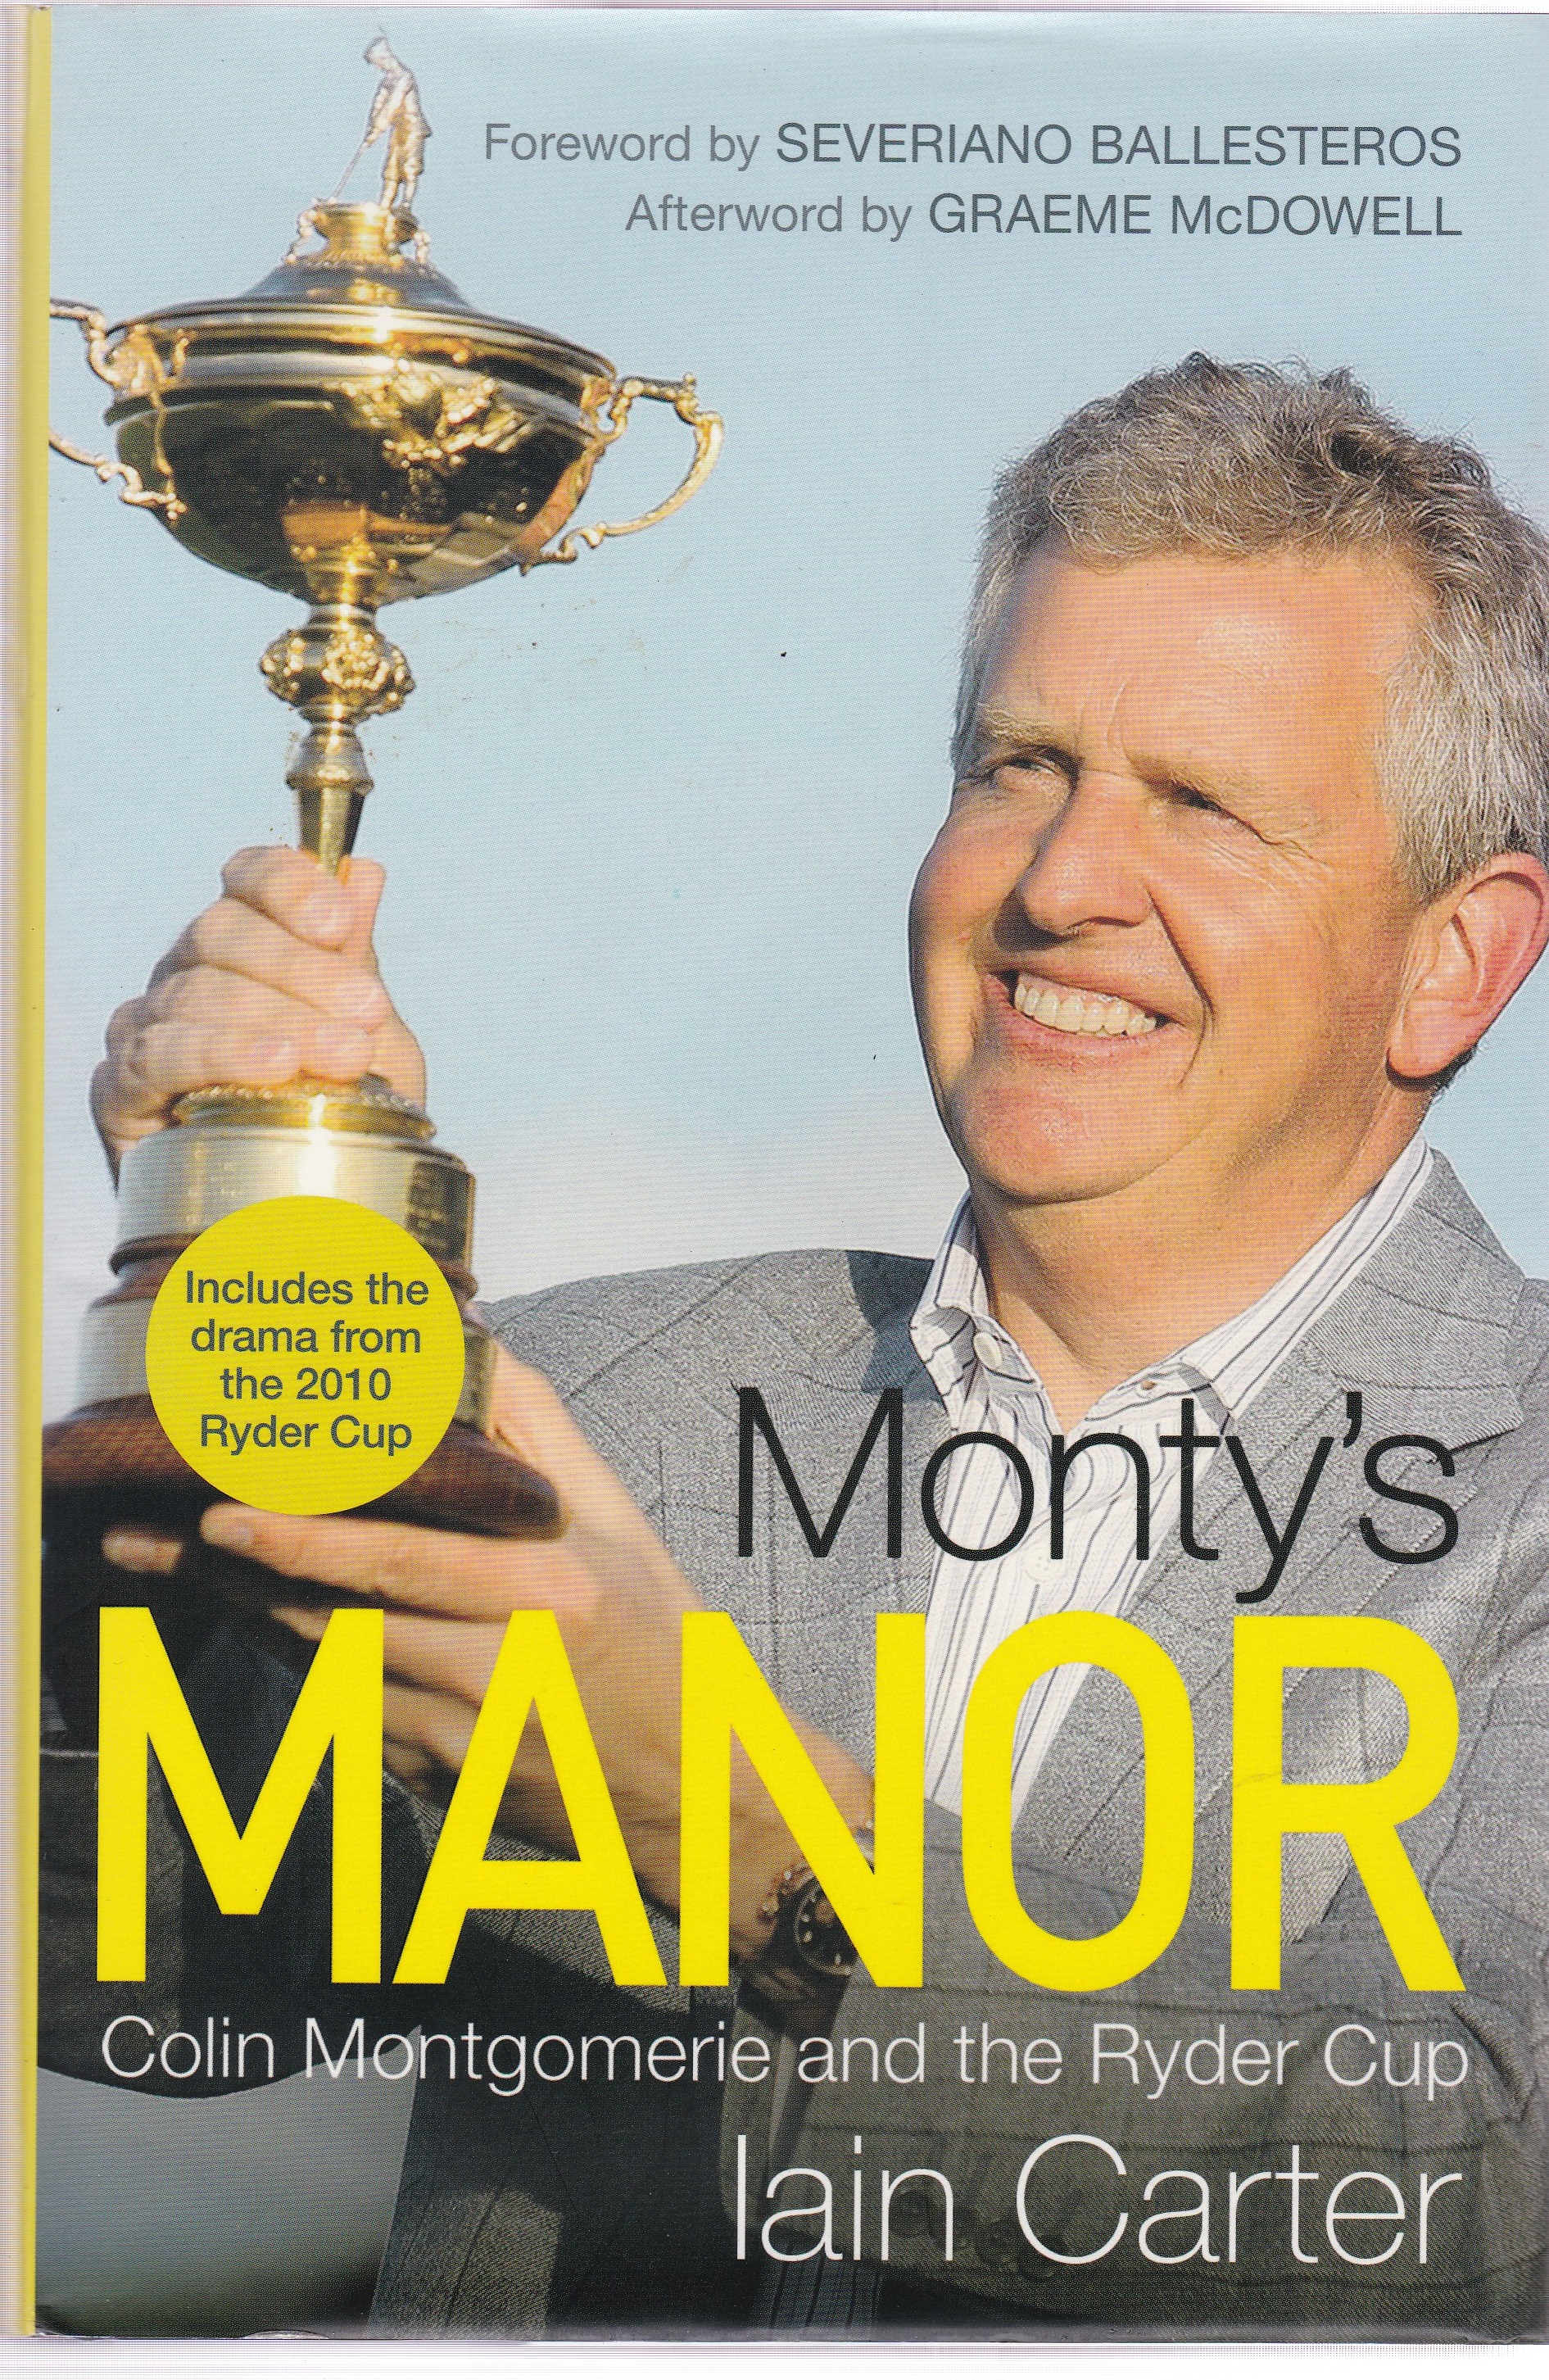 Golfing Books - Batch of eight Monty's Manor, McDonnell-complete book of golfing Jack Nicolaus'